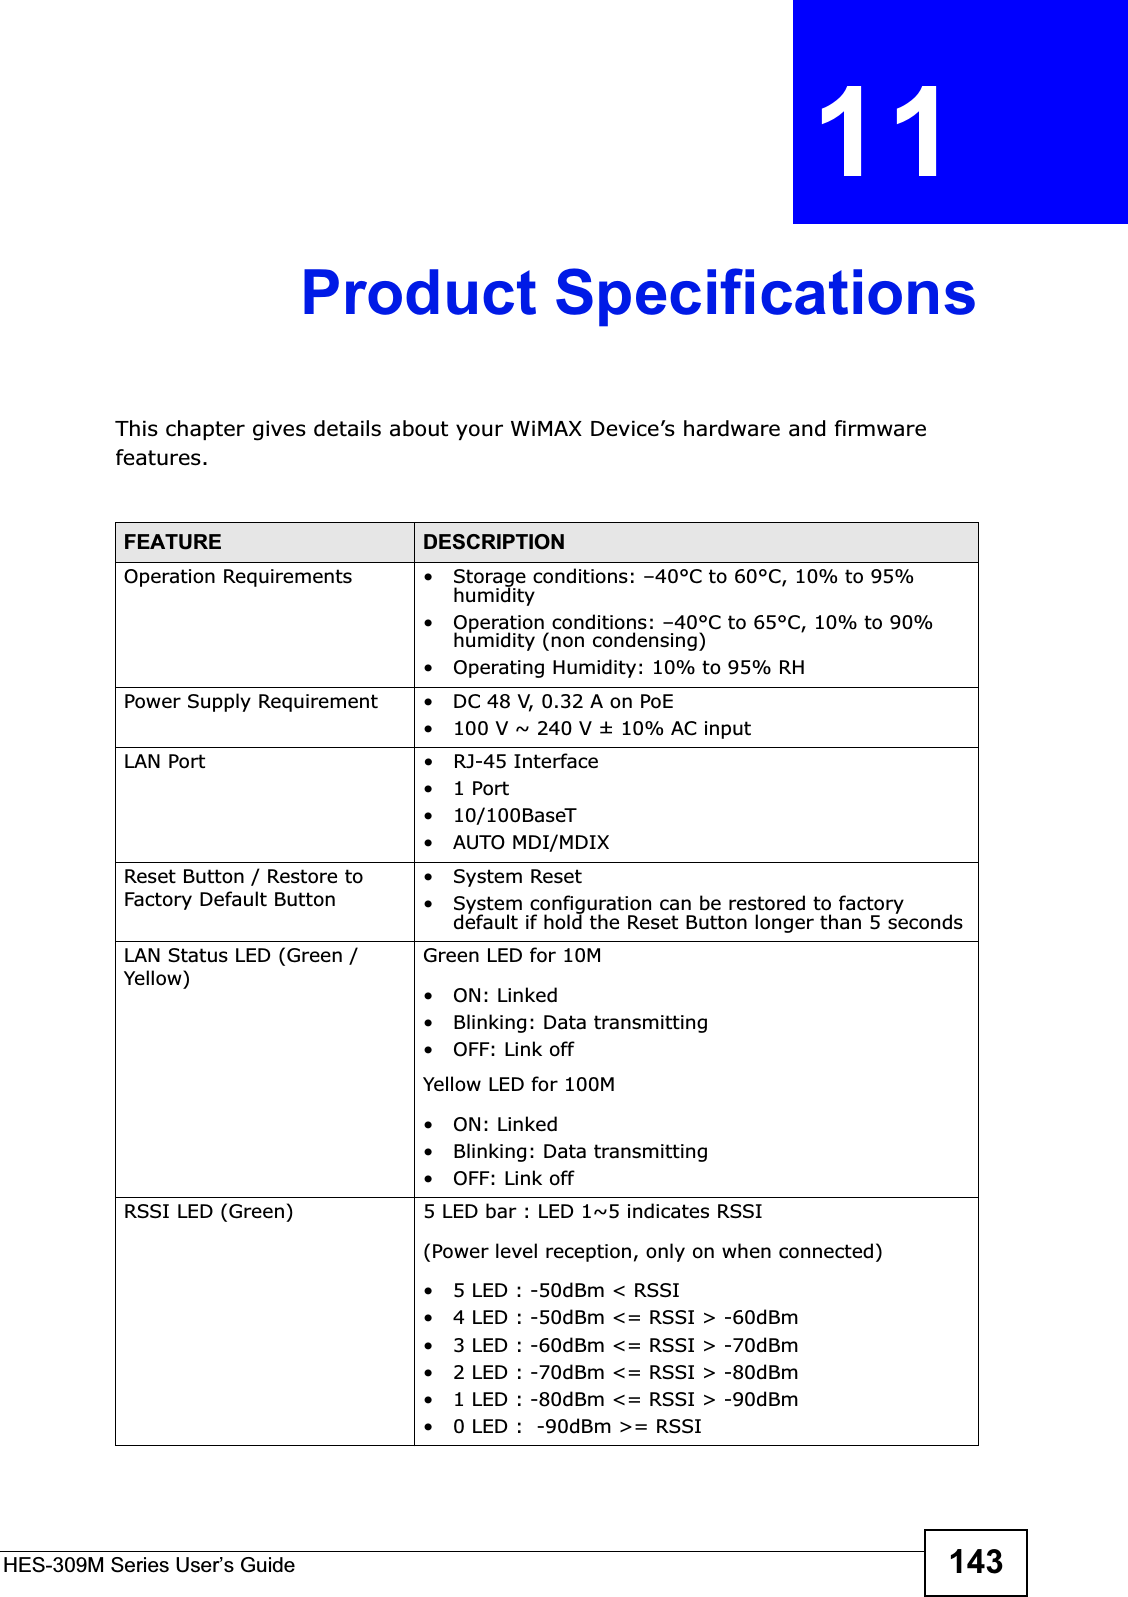 HES-309M Series User’s Guide 143CHAPTER 11 Product SpecificationsThis chapter gives details about your WiMAX Device’s hardware and firmware features.FEATURE DESCRIPTIONOperation Requirements • Storage conditions: –40°C to 60°C, 10% to 95% humidity• Operation conditions: –40°C to 65°C, 10% to 90% humidity (non condensing)• Operating Humidity: 10% to 95% RHPower Supply Requirement • DC 48 V, 0.32 A on PoE• 100 V ~ 240 V ± 10% AC inputLAN Port • RJ-45 Interface•1 Port• 10/100BaseT• AUTO MDI/MDIXReset Button / Restore to Factory Default Button•System Reset• System configuration can be restored to factory default if hold the Reset Button longer than 5 secondsLAN Status LED (Green / Yellow)Green LED for 10M•ON: Linked• Blinking: Data transmitting•OFF: Link offYellow LED for 100M•ON: Linked• Blinking: Data transmitting•OFF: Link offRSSI LED (Green) 5 LED bar : LED 1~5 indicates RSSI(Power level reception, only on when connected)• 5 LED : -50dBm &lt; RSSI • 4 LED : -50dBm &lt;= RSSI &gt; -60dBm• 3 LED : -60dBm &lt;= RSSI &gt; -70dBm• 2 LED : -70dBm &lt;= RSSI &gt; -80dBm• 1 LED : -80dBm &lt;= RSSI &gt; -90dBm• 0 LED :  -90dBm &gt;= RSSI